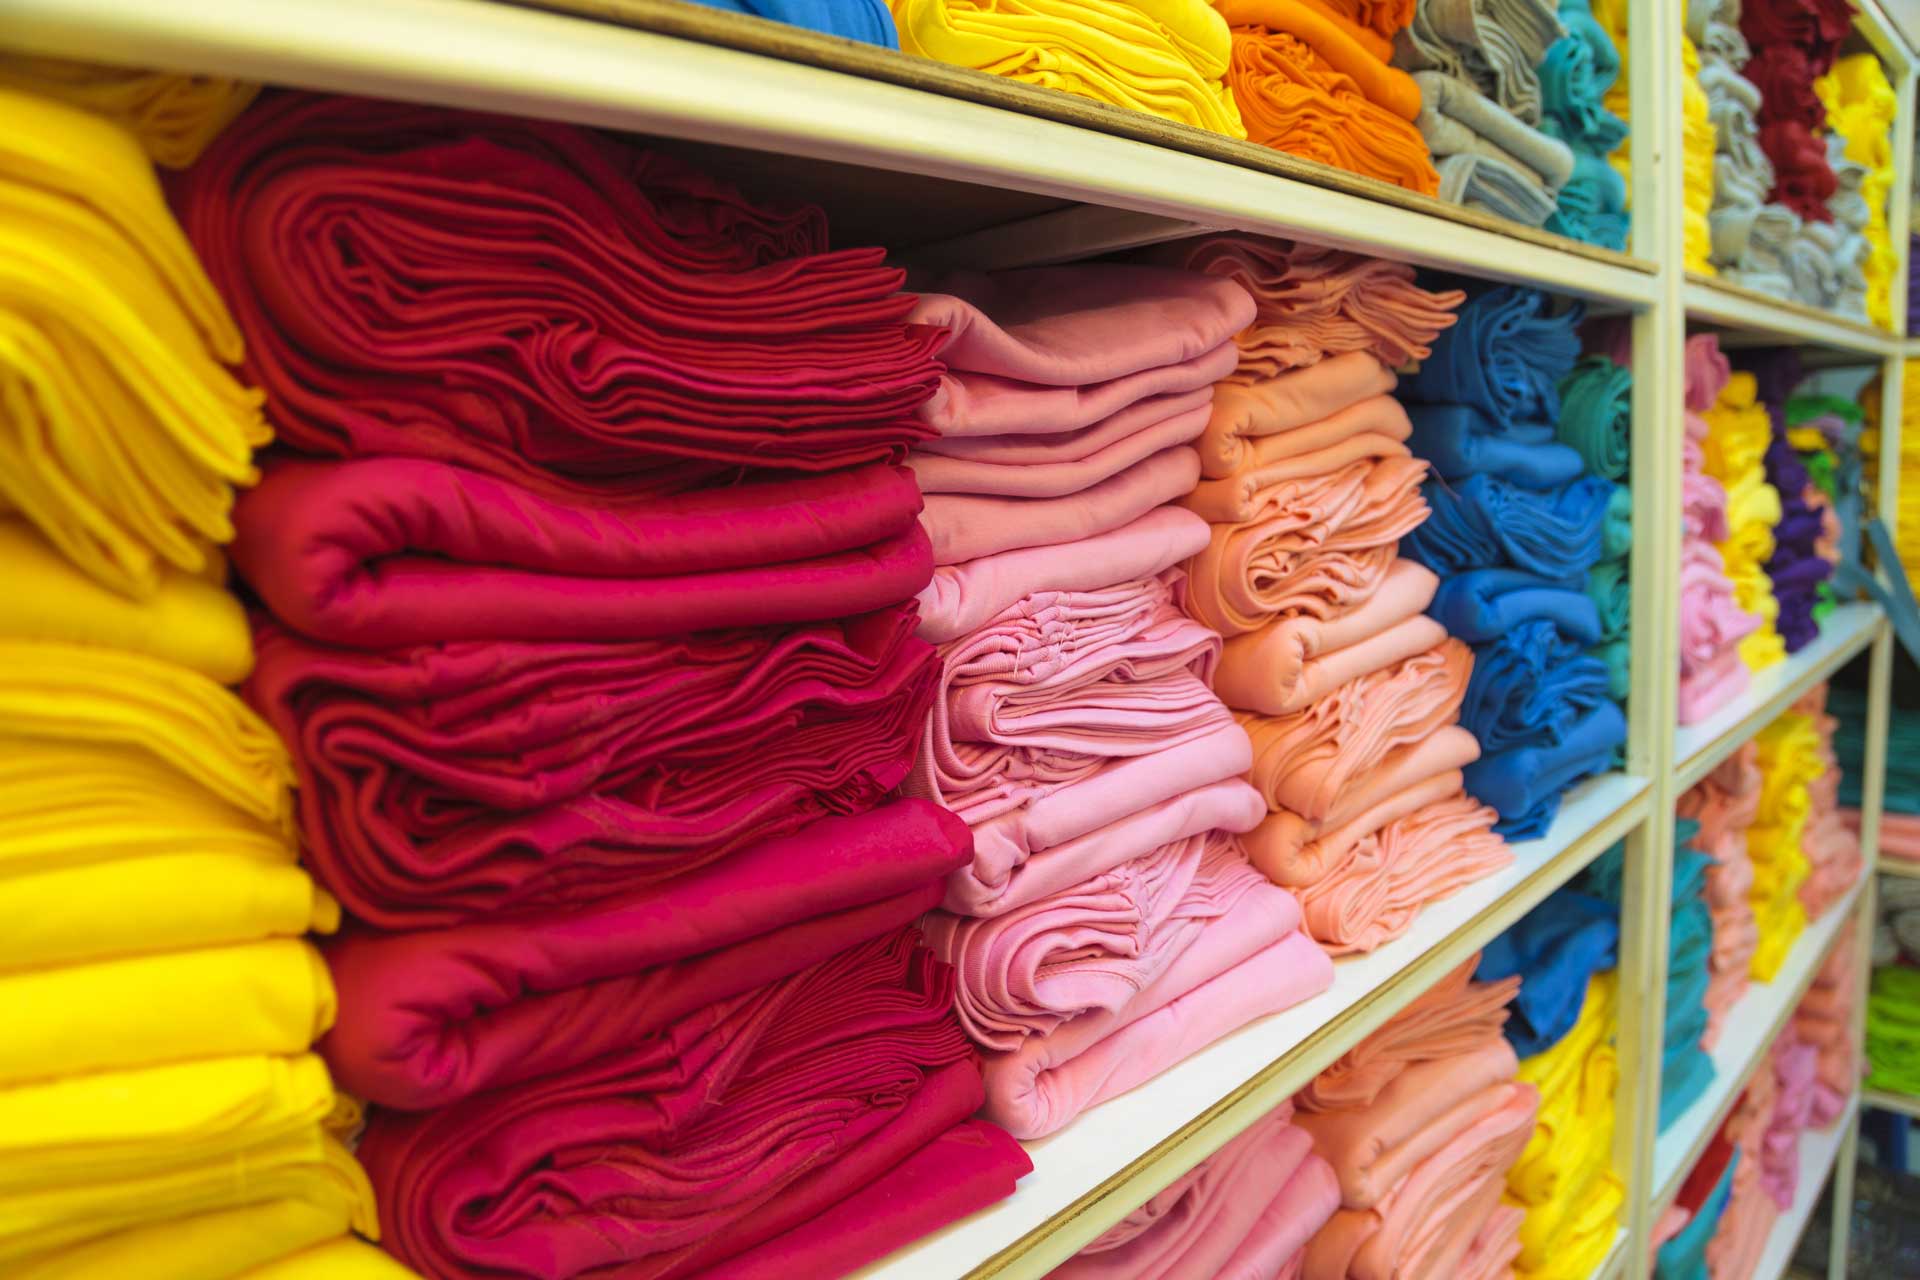 How Much Does It Cost to Print 1,000 T-Shirts? Factors that Determine the Price